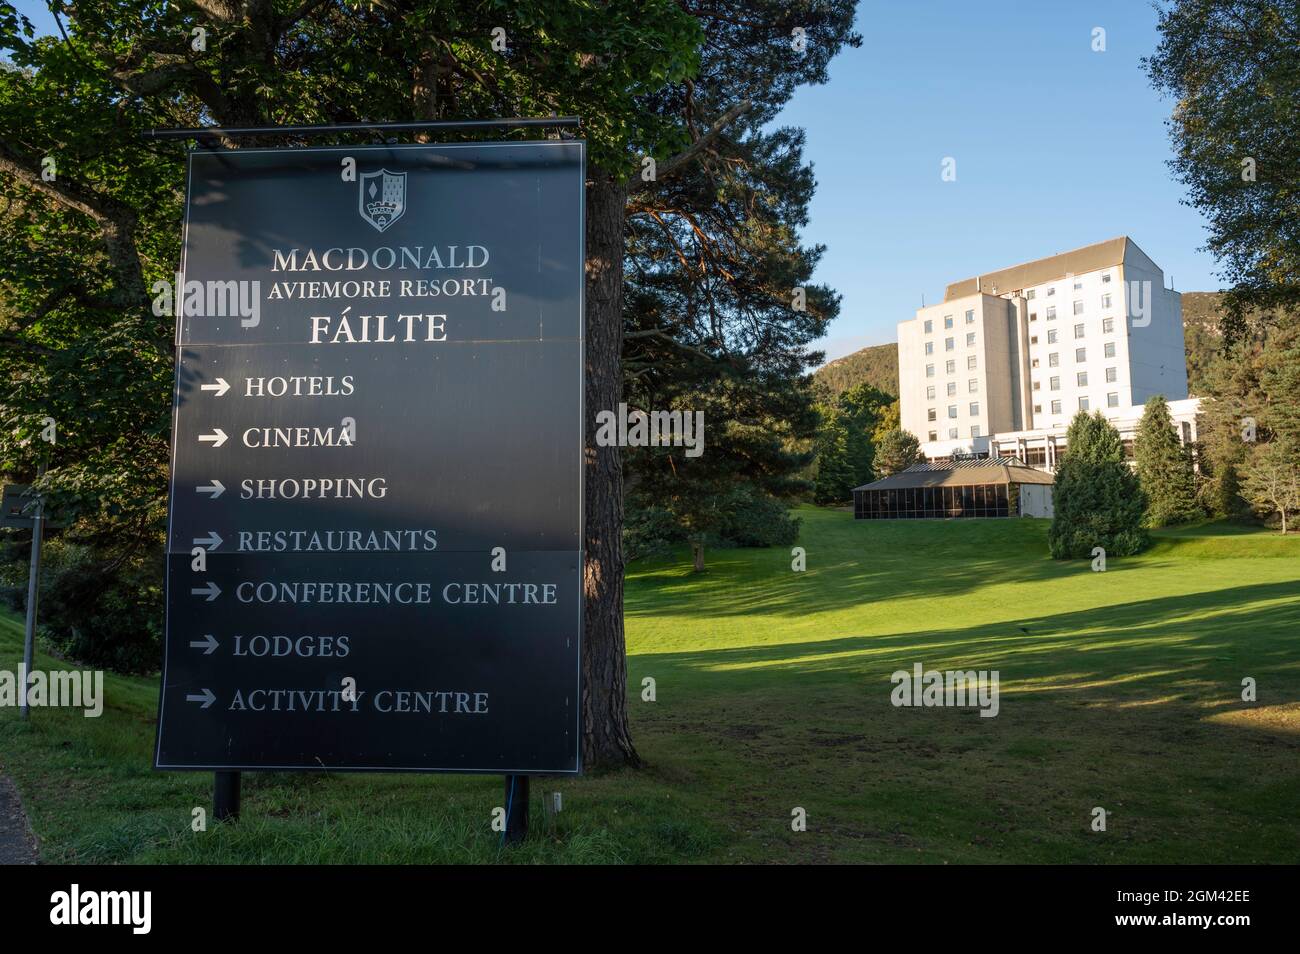 Sign for MacDonald Aviemore Resort with lawn and building of resort in background. Sunny day with blue sky. No people. Stock Photo